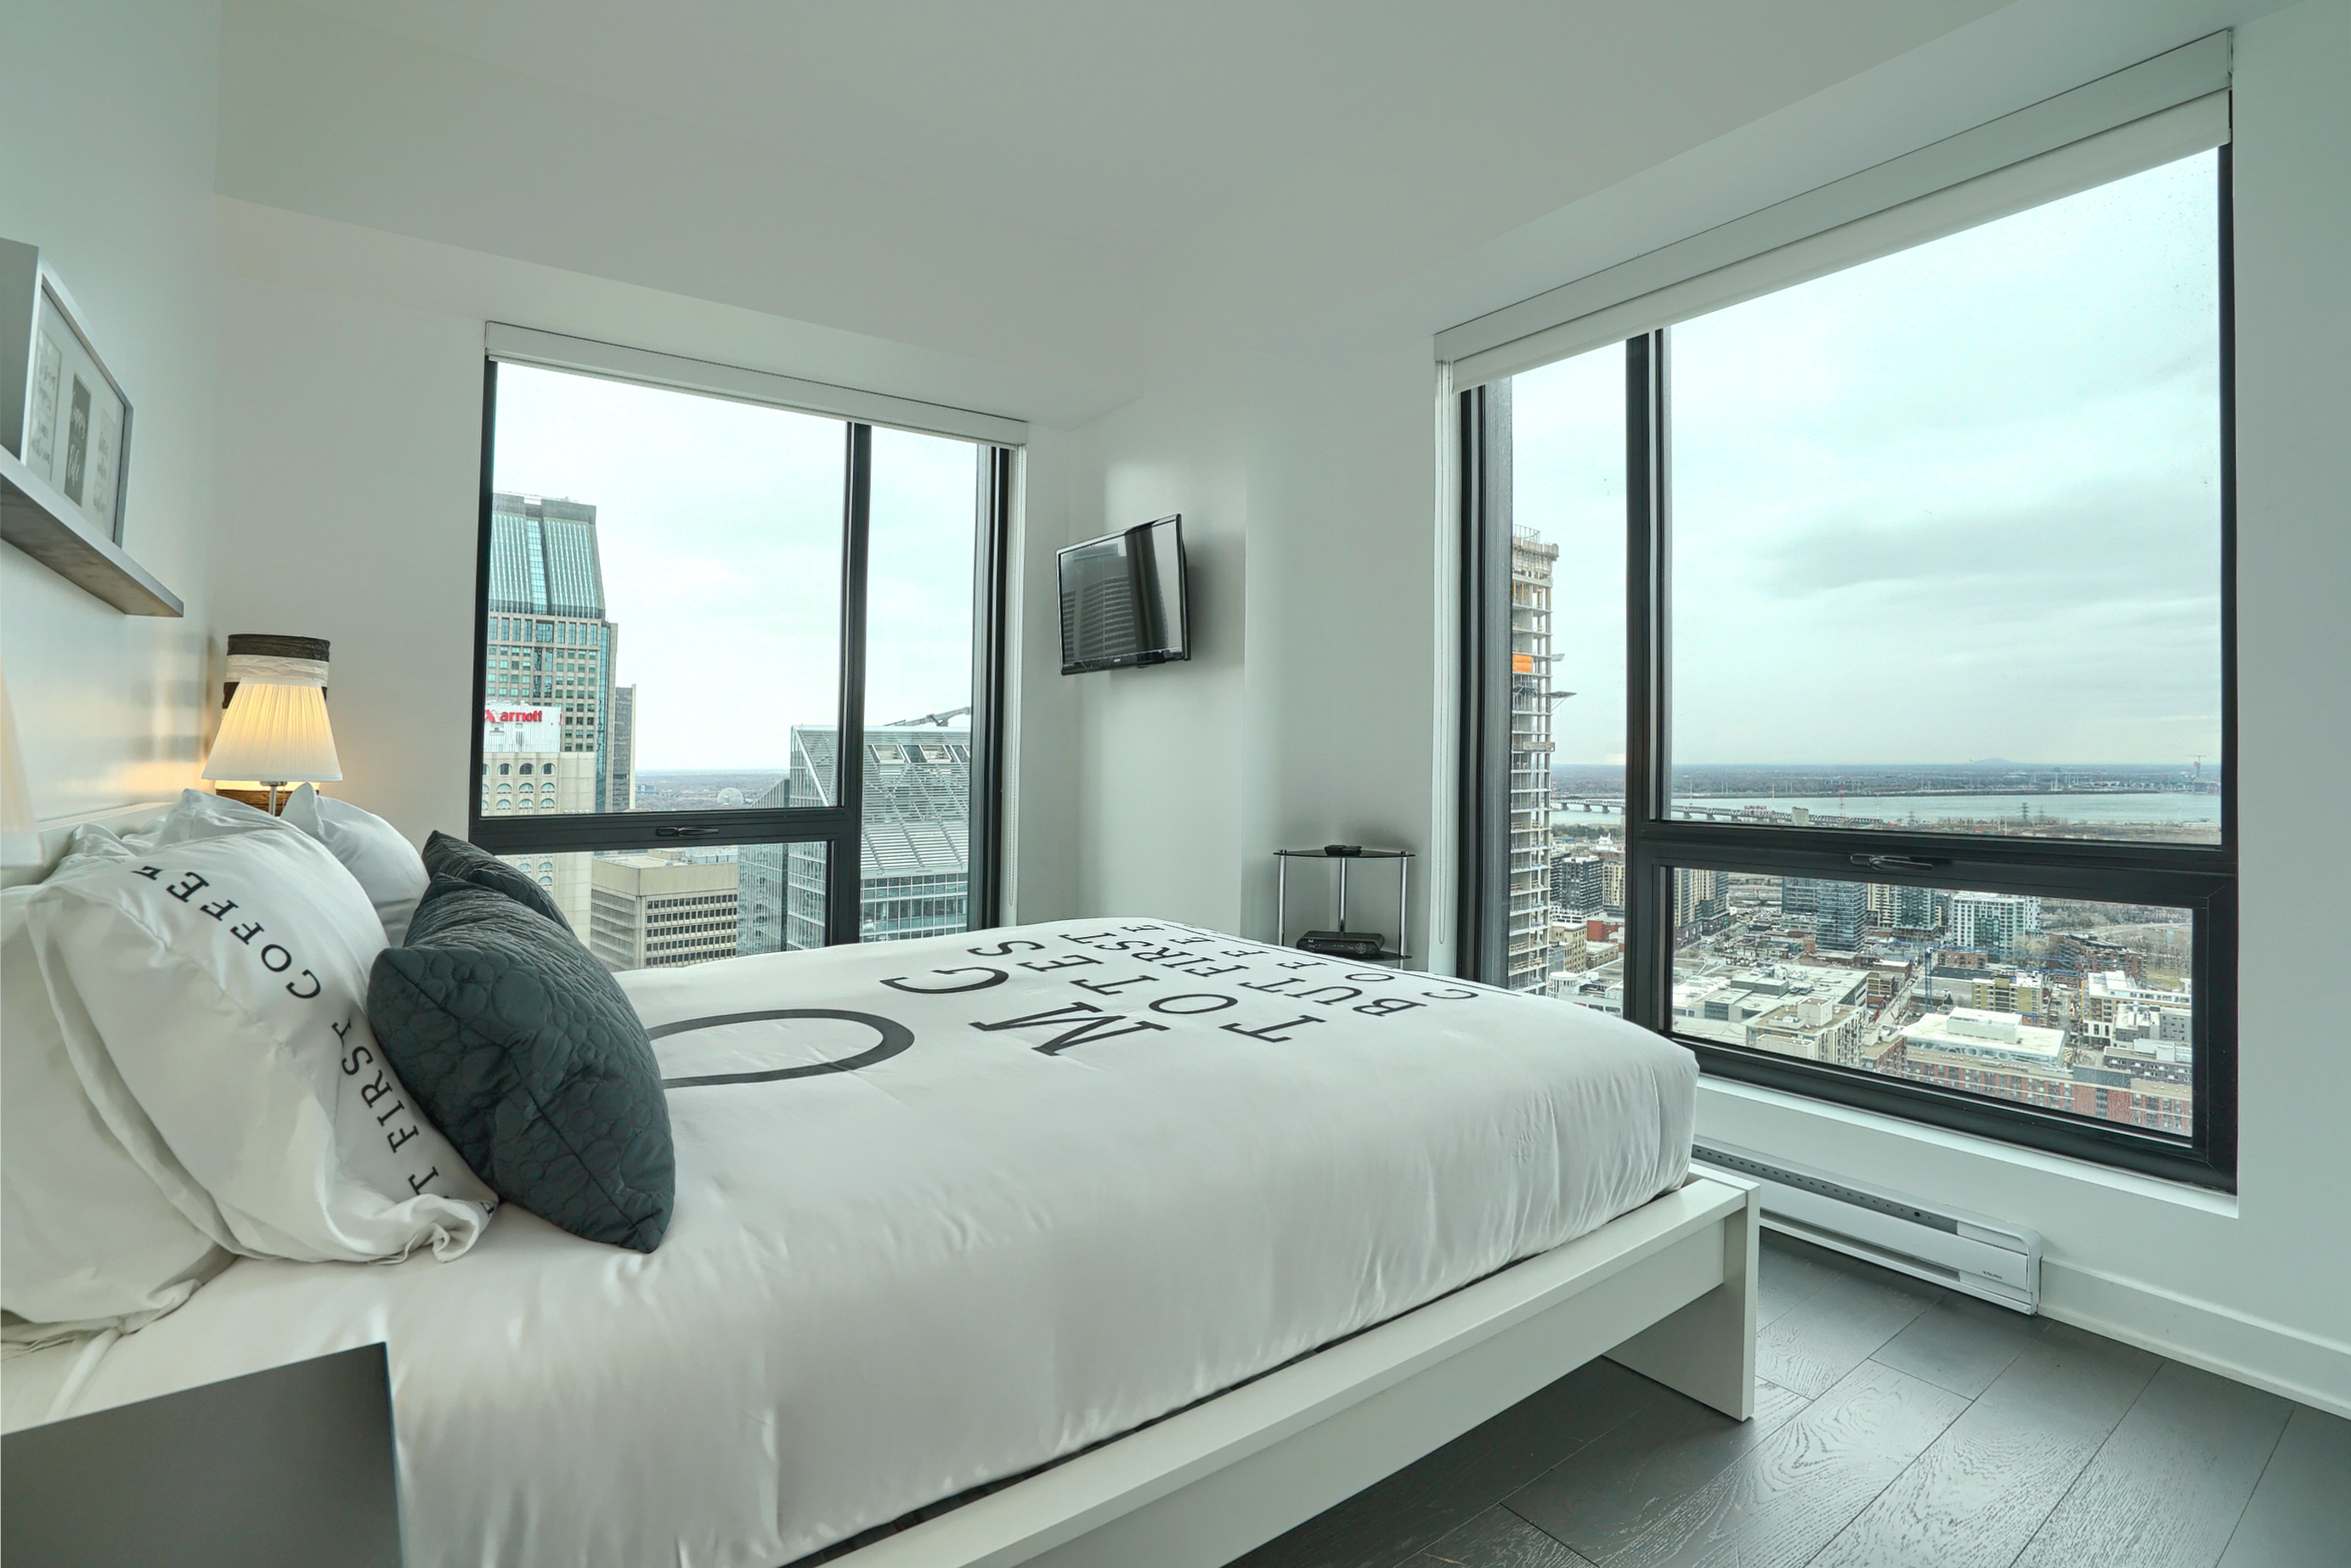 Angled view of the bedroom showing the side of the bed and both large floor-to-ceiling windows to make your stay in this furnished short term housing apartment in montreal unique